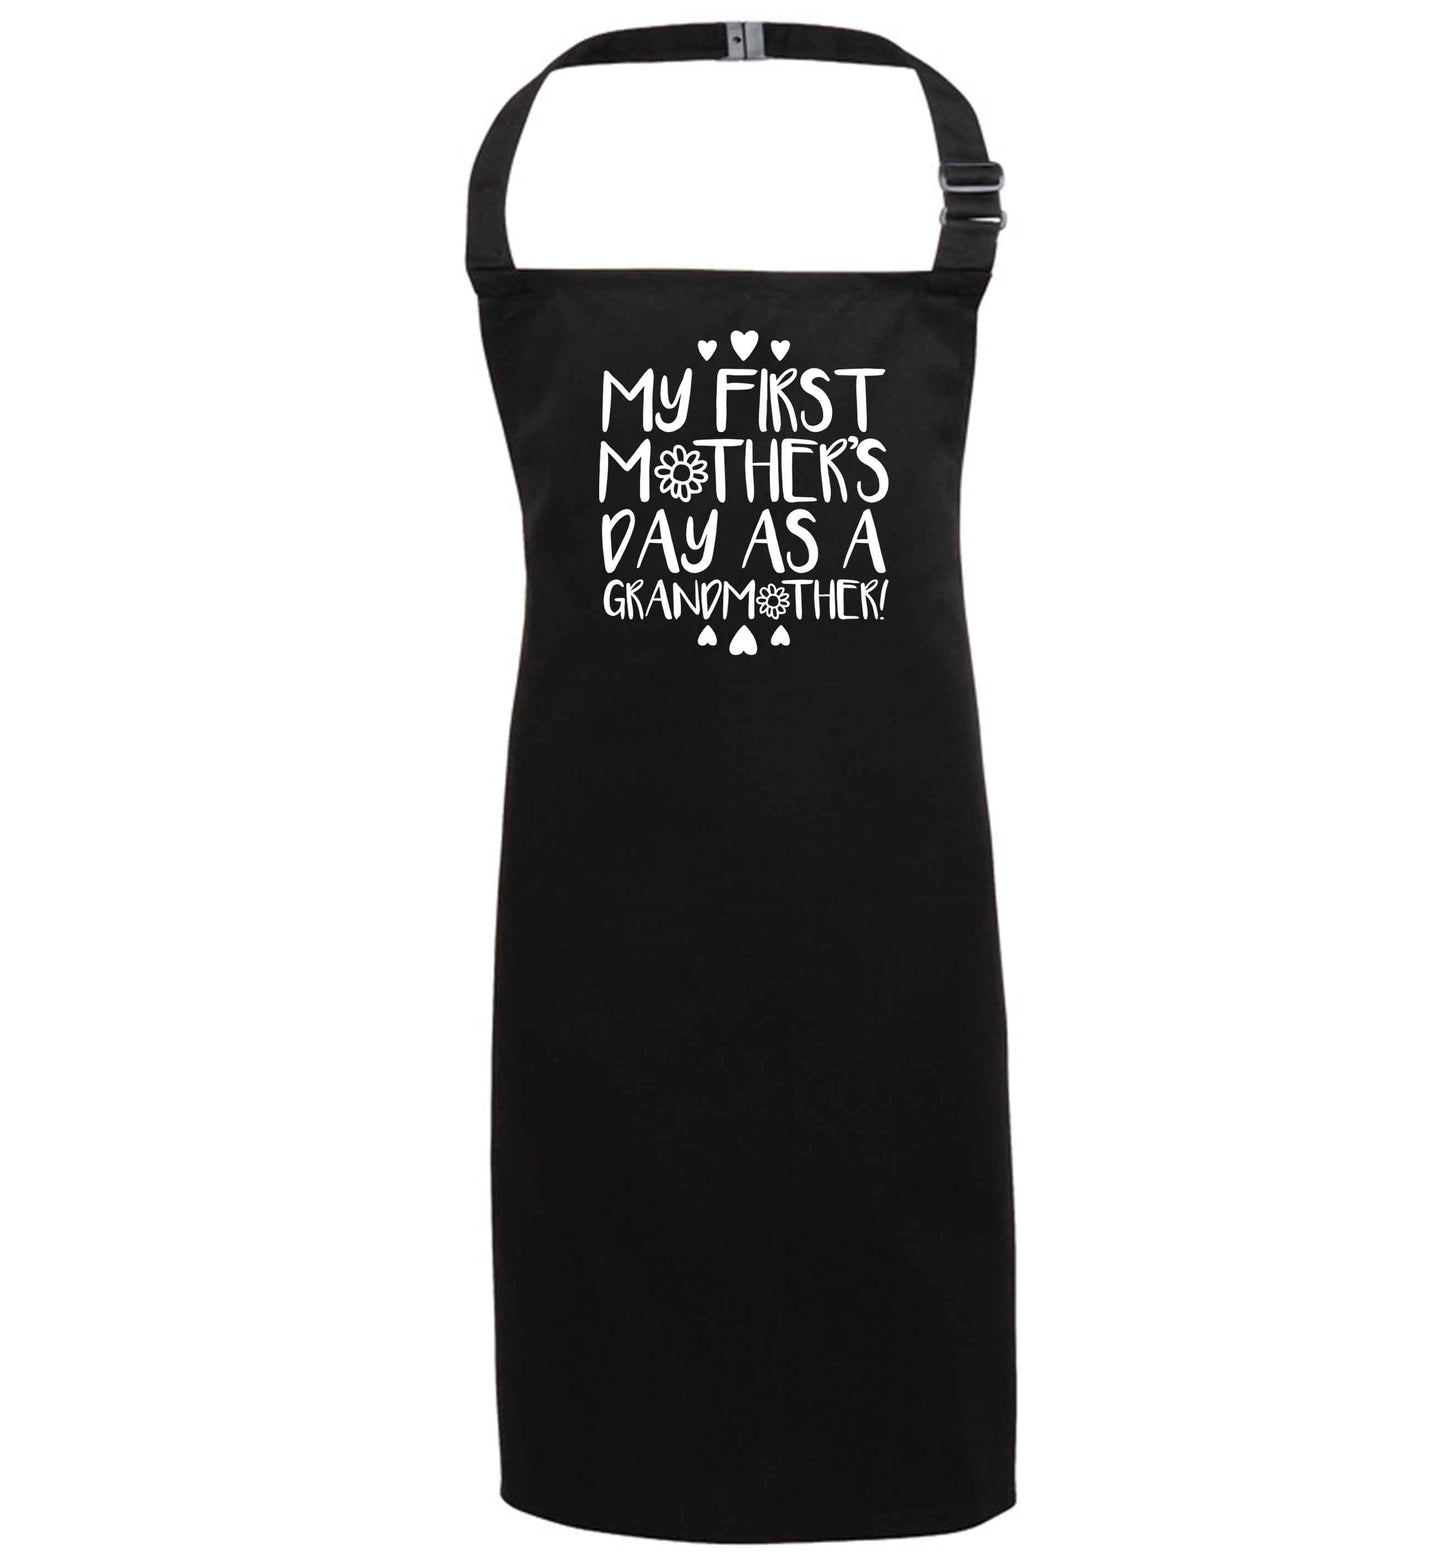 It's my first mother's day as a grandmother black apron 7-10 years